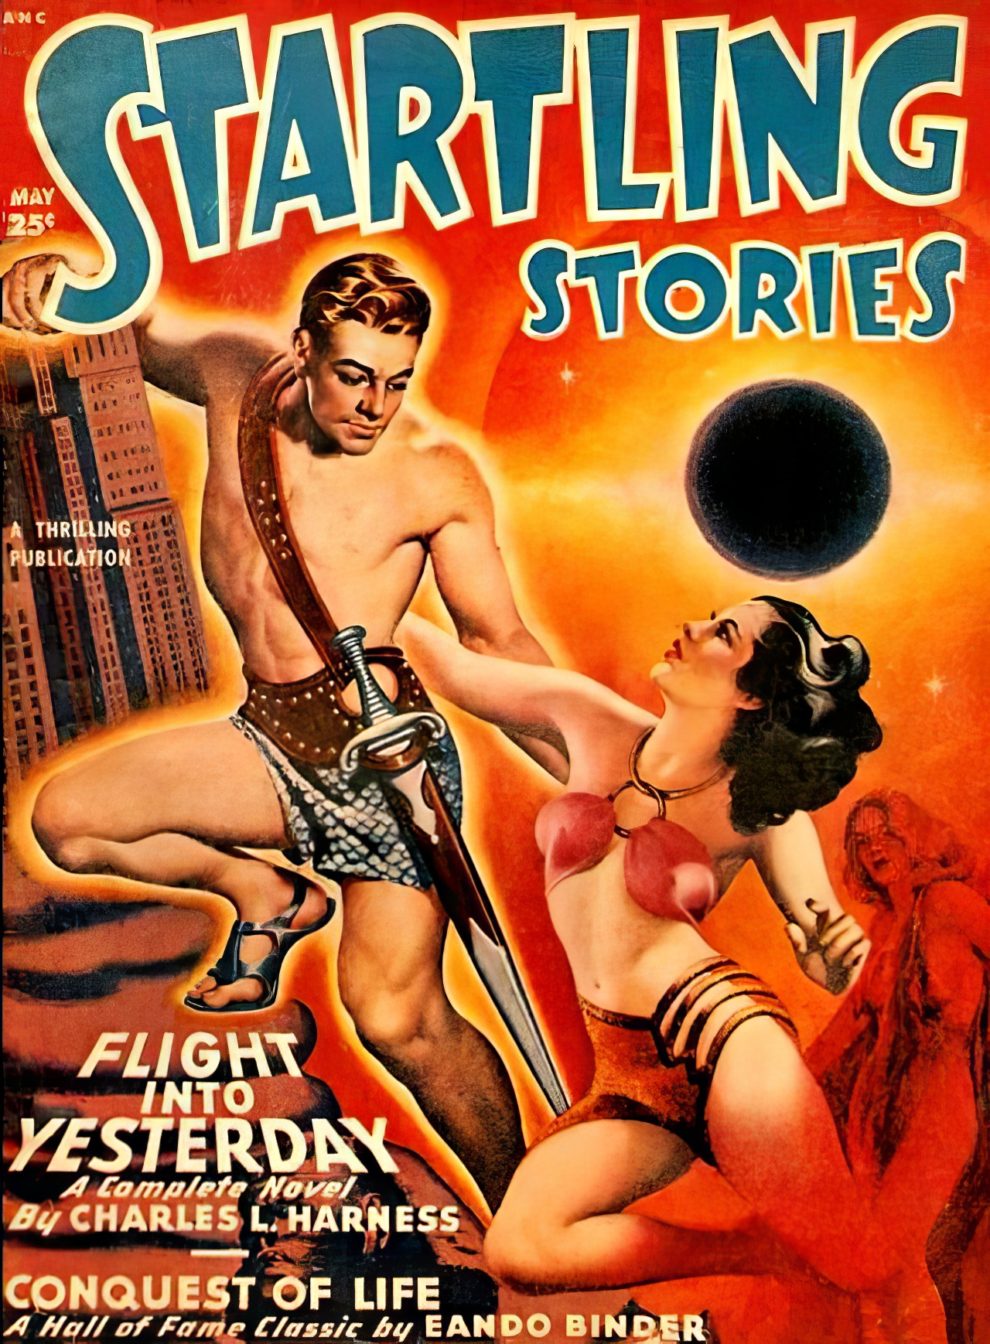 Startling Stories Covers 1940s 48 